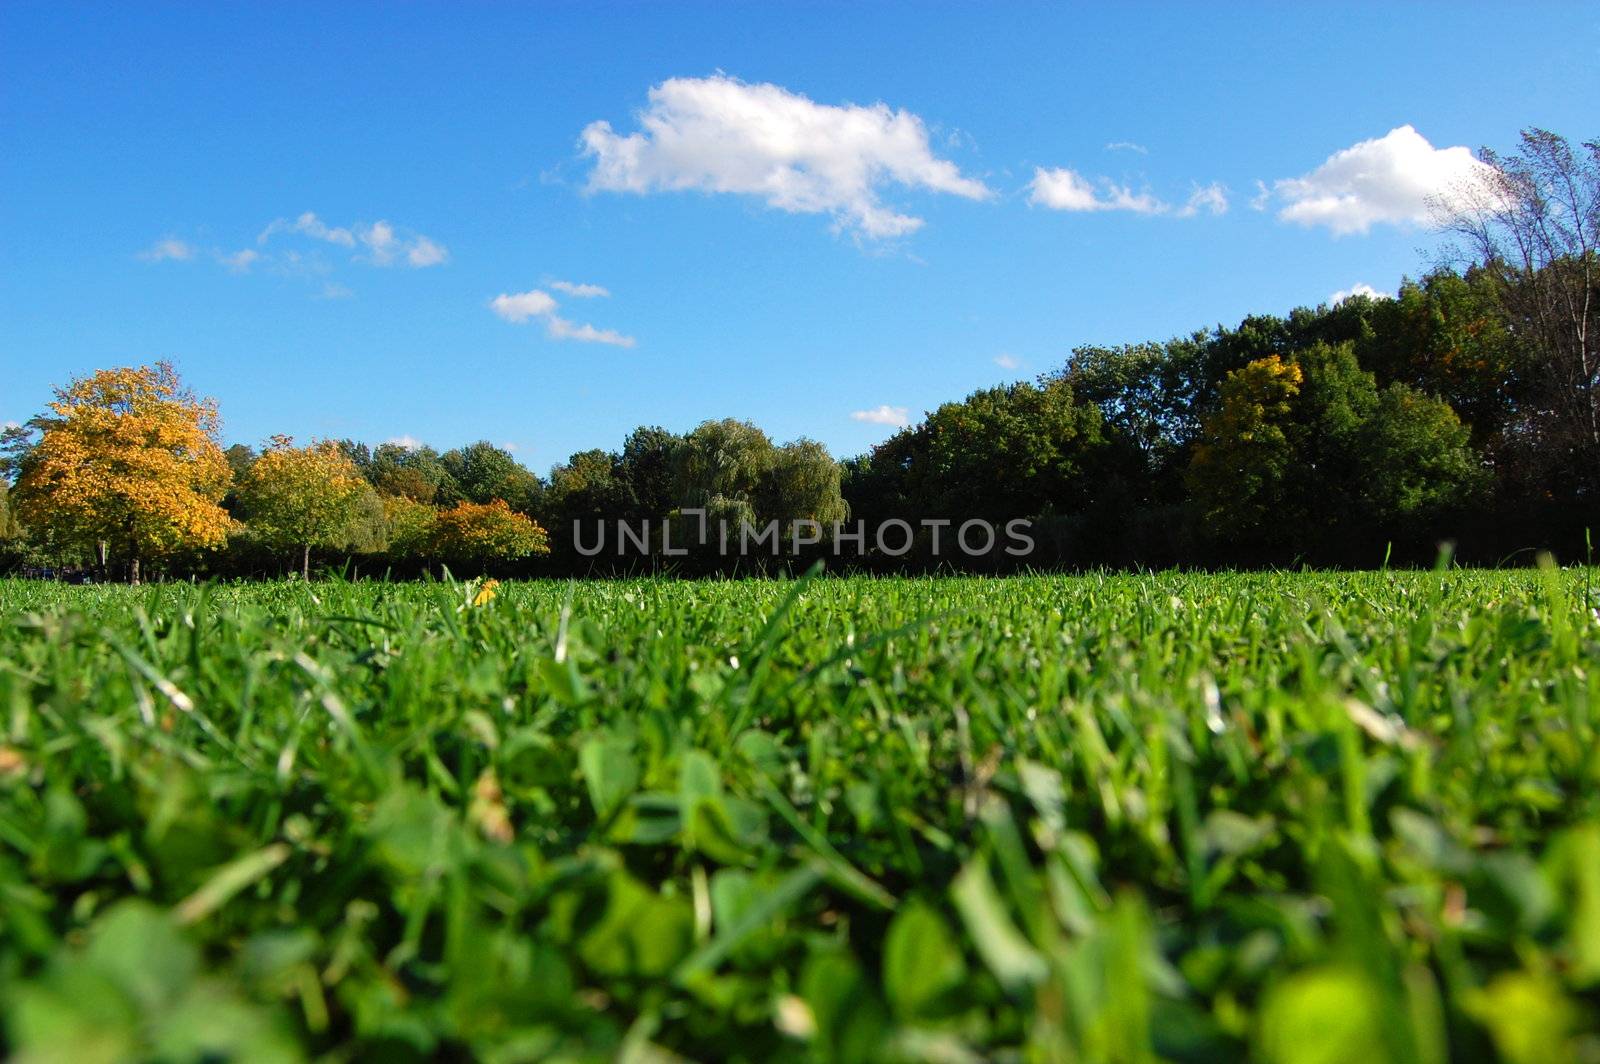 green trees of a park at summer or autumn under blue sky